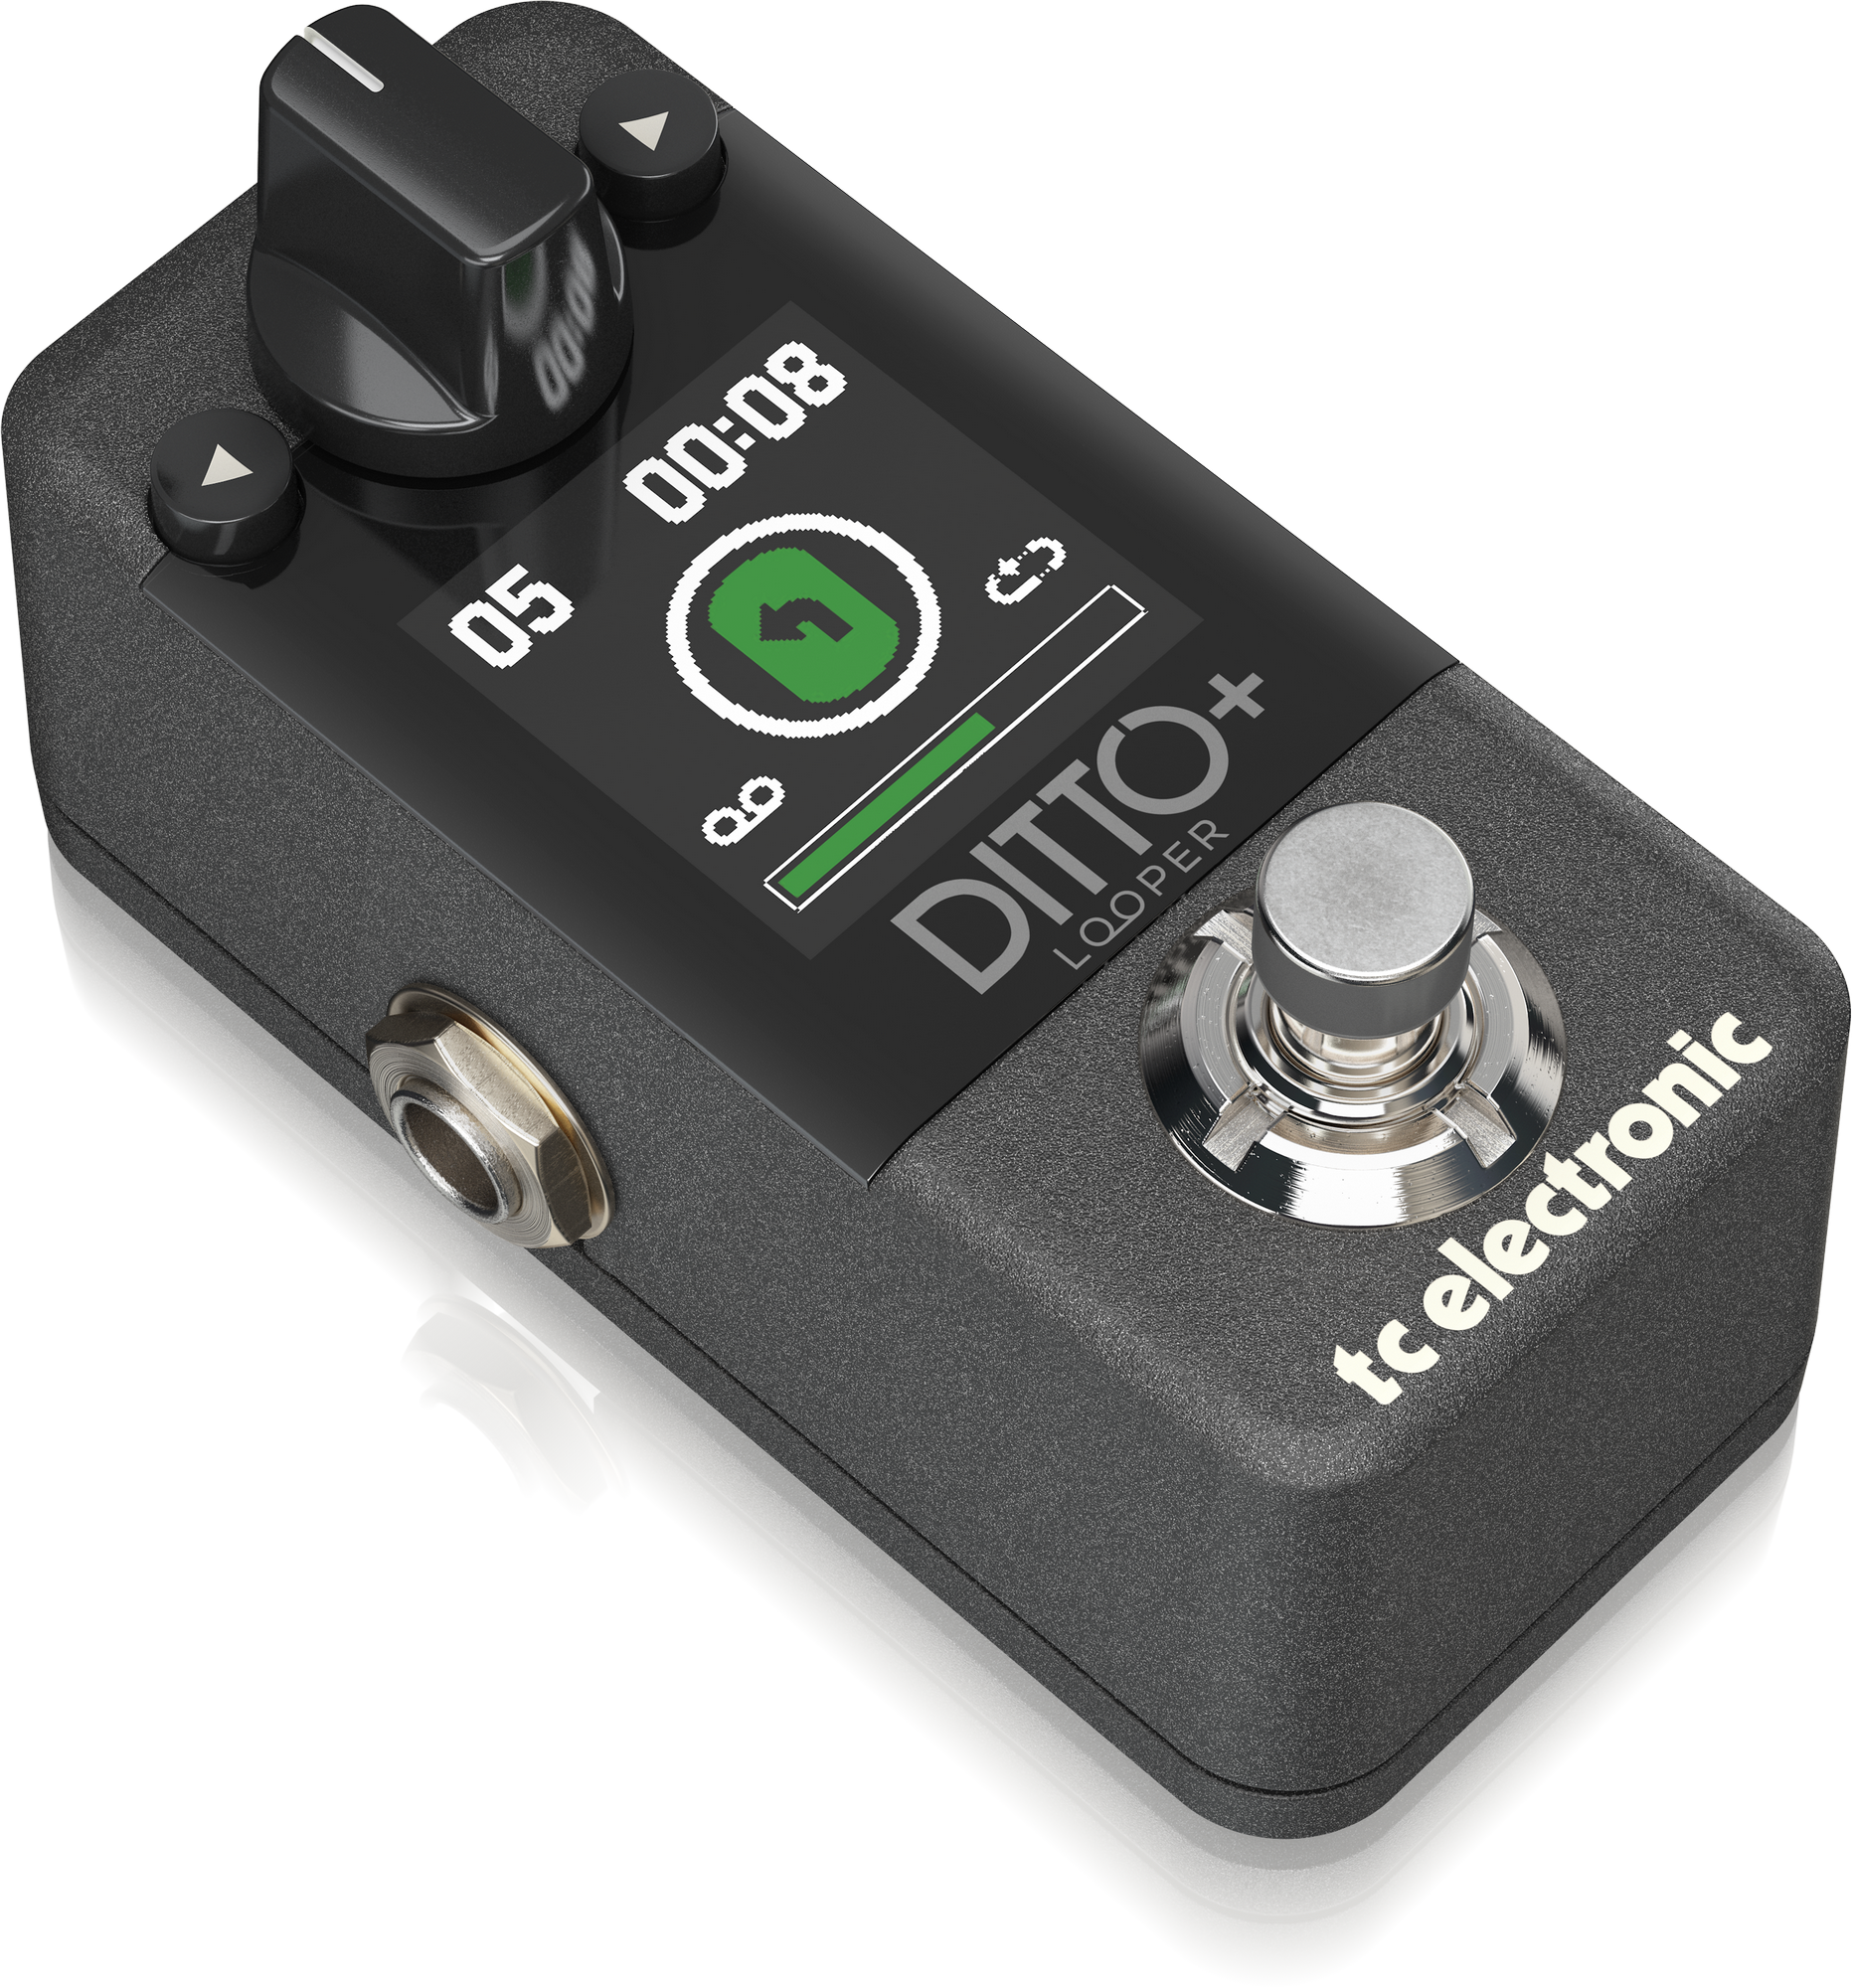 TC Electronic DITTO+ LOOPER Next Generation 60-Minute Multi-Session Looper Pedal, TC ELECTRONIC, EFFECTS, tc-electronic-effects-tc-ditto-looper, ZOSO MUSIC SDN BHD